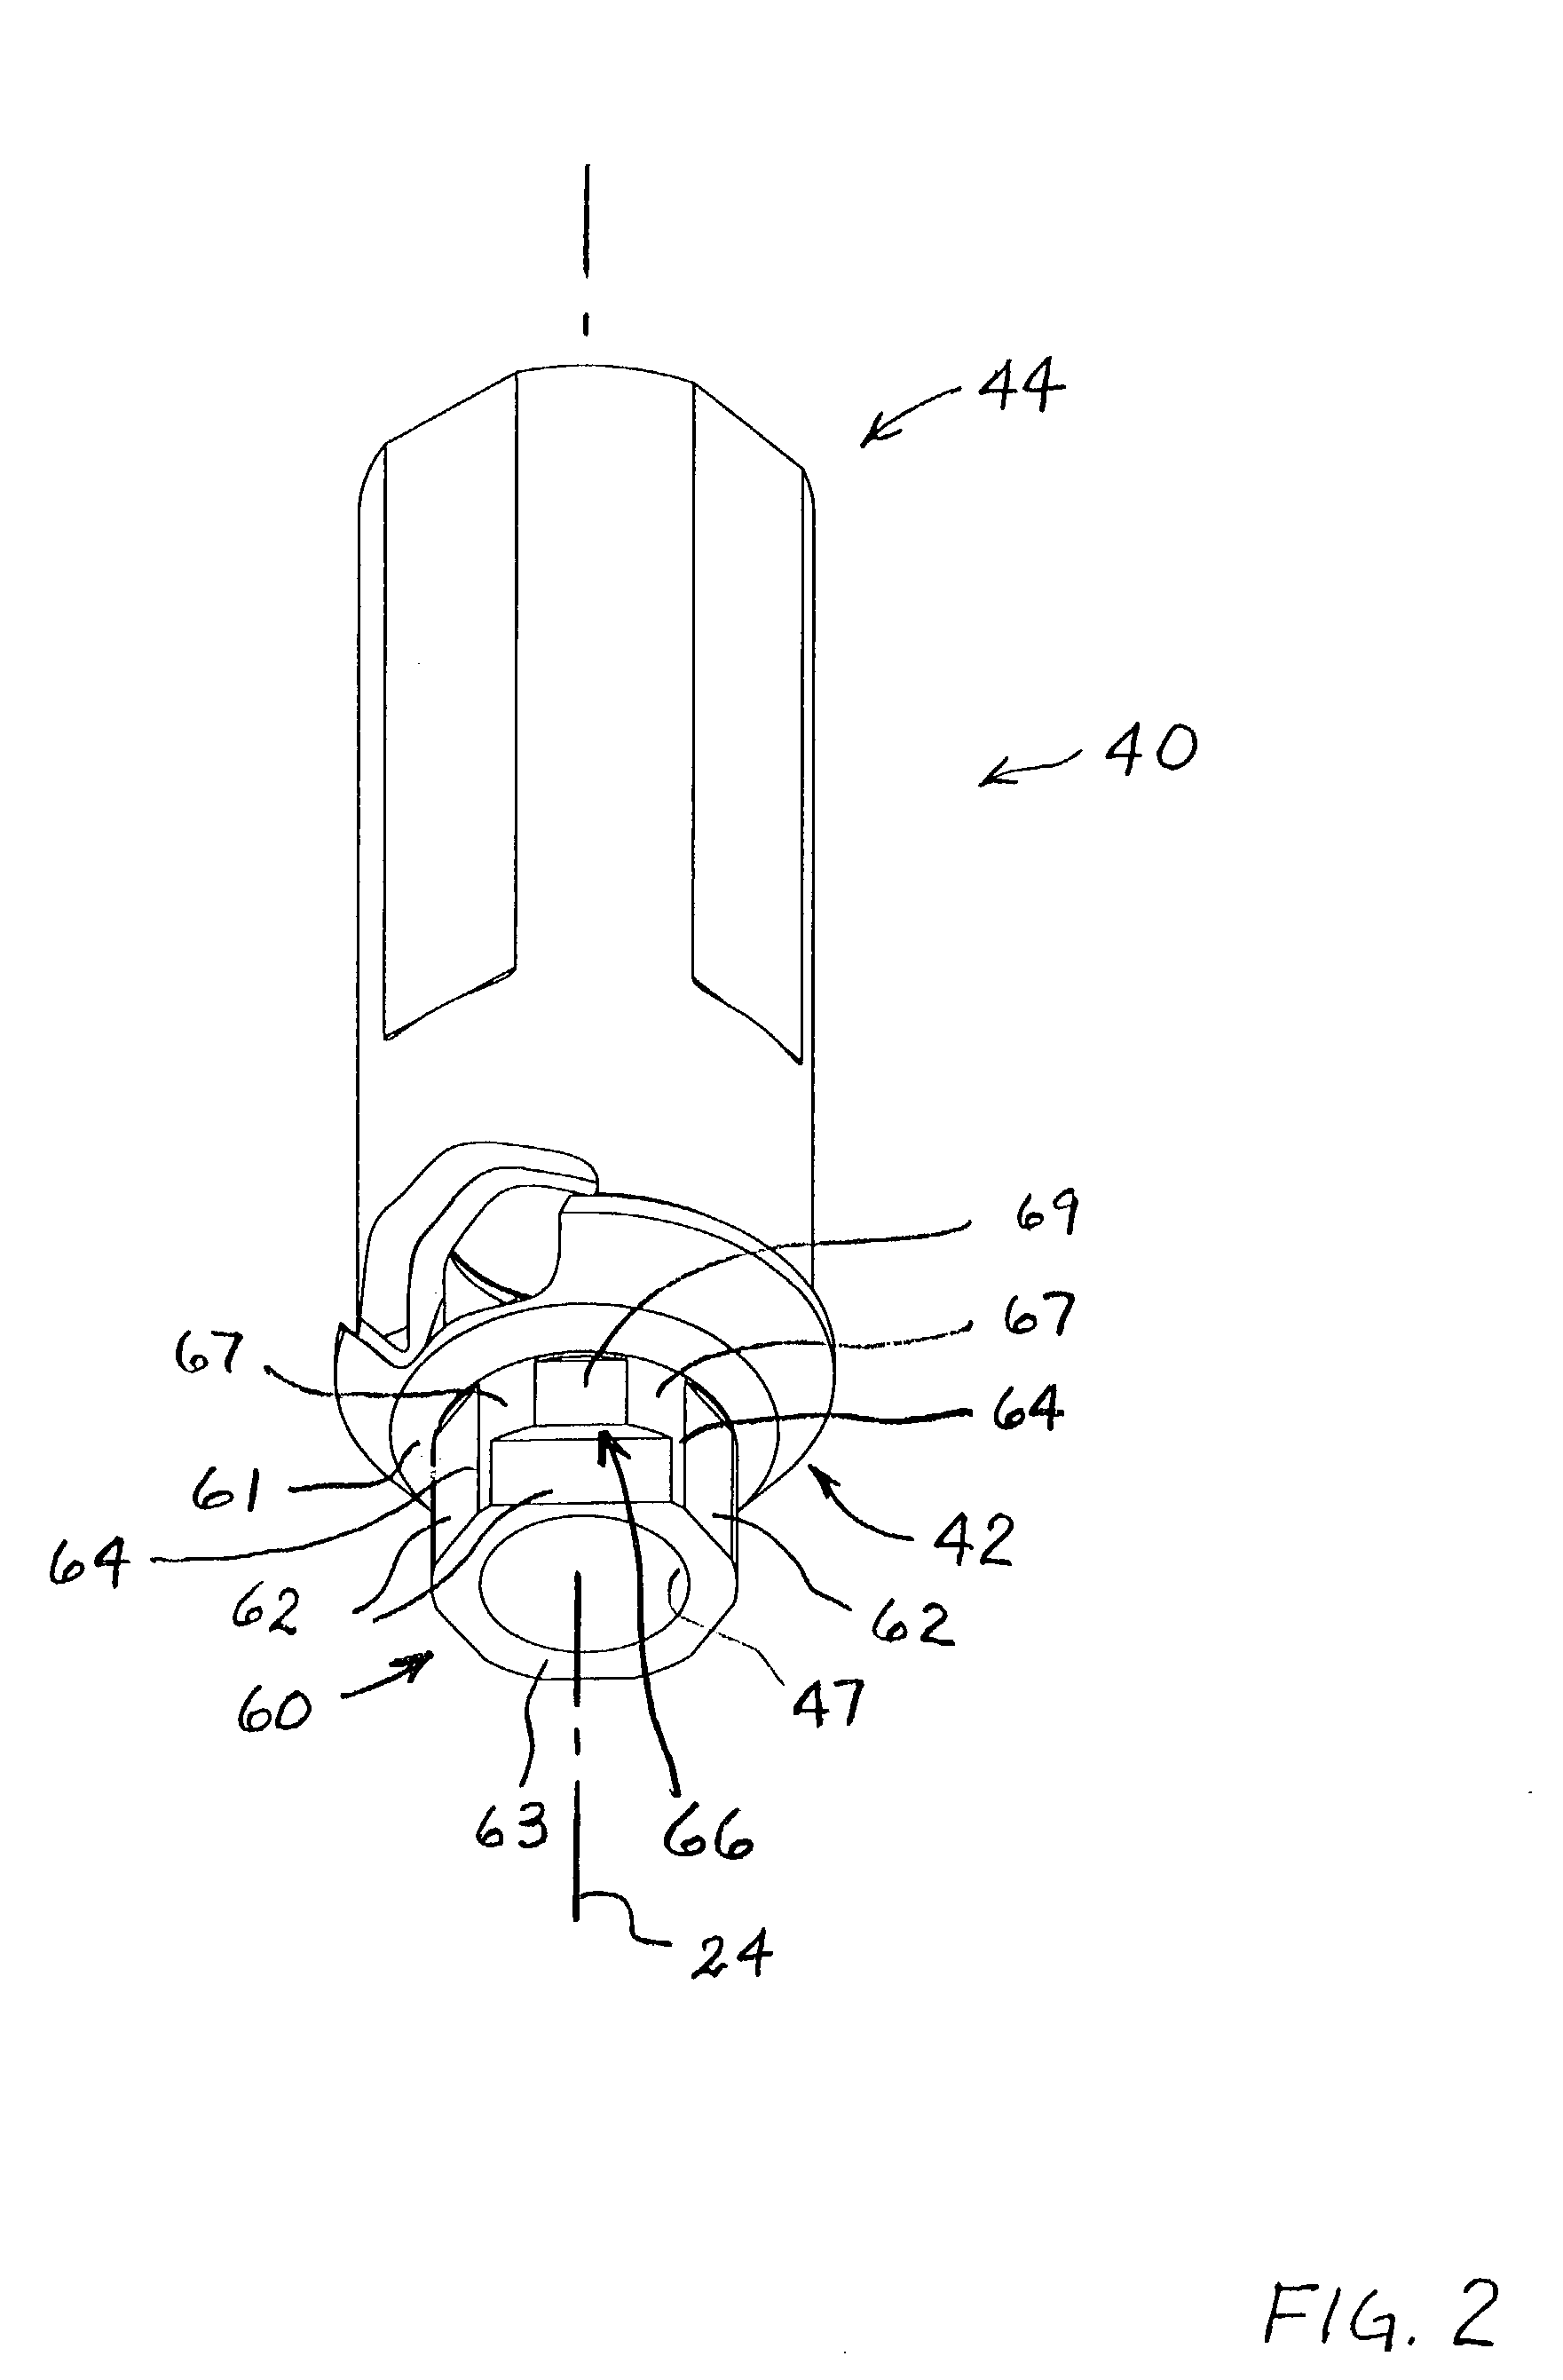 Rotationally immobilized dental implant and abutment system